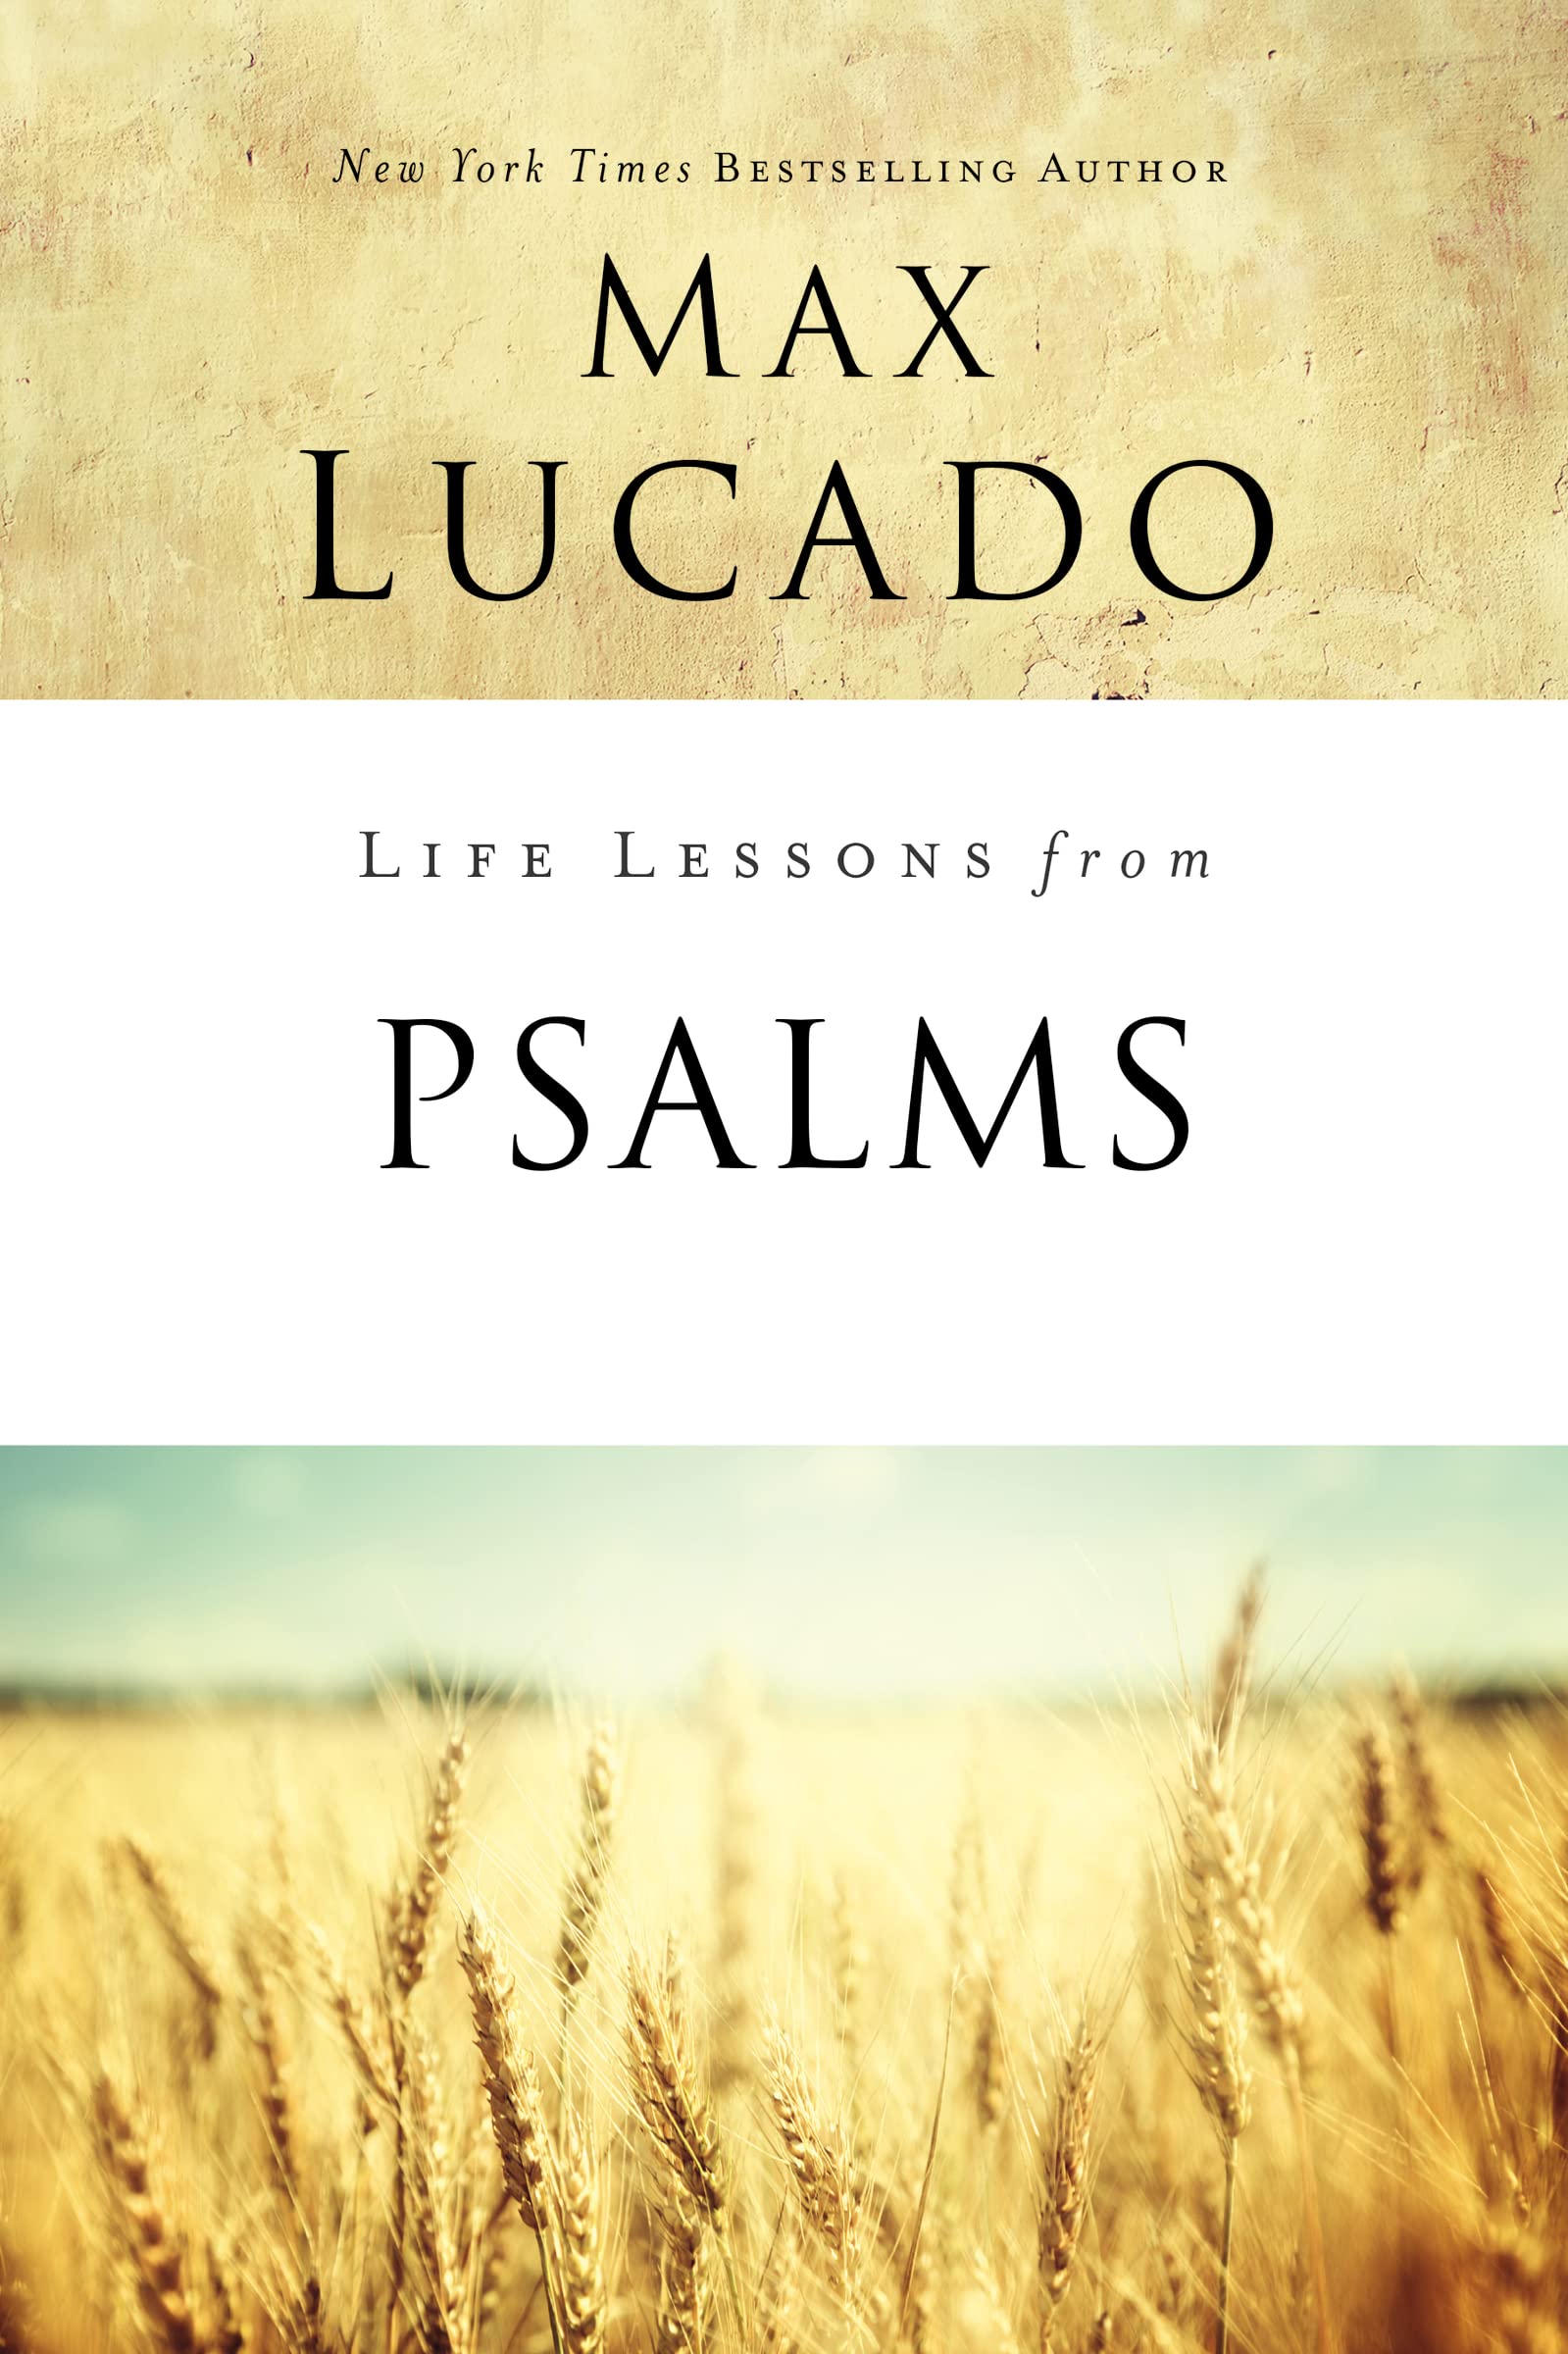 Life Lessons from Psalms: A Praise Book for God’s People